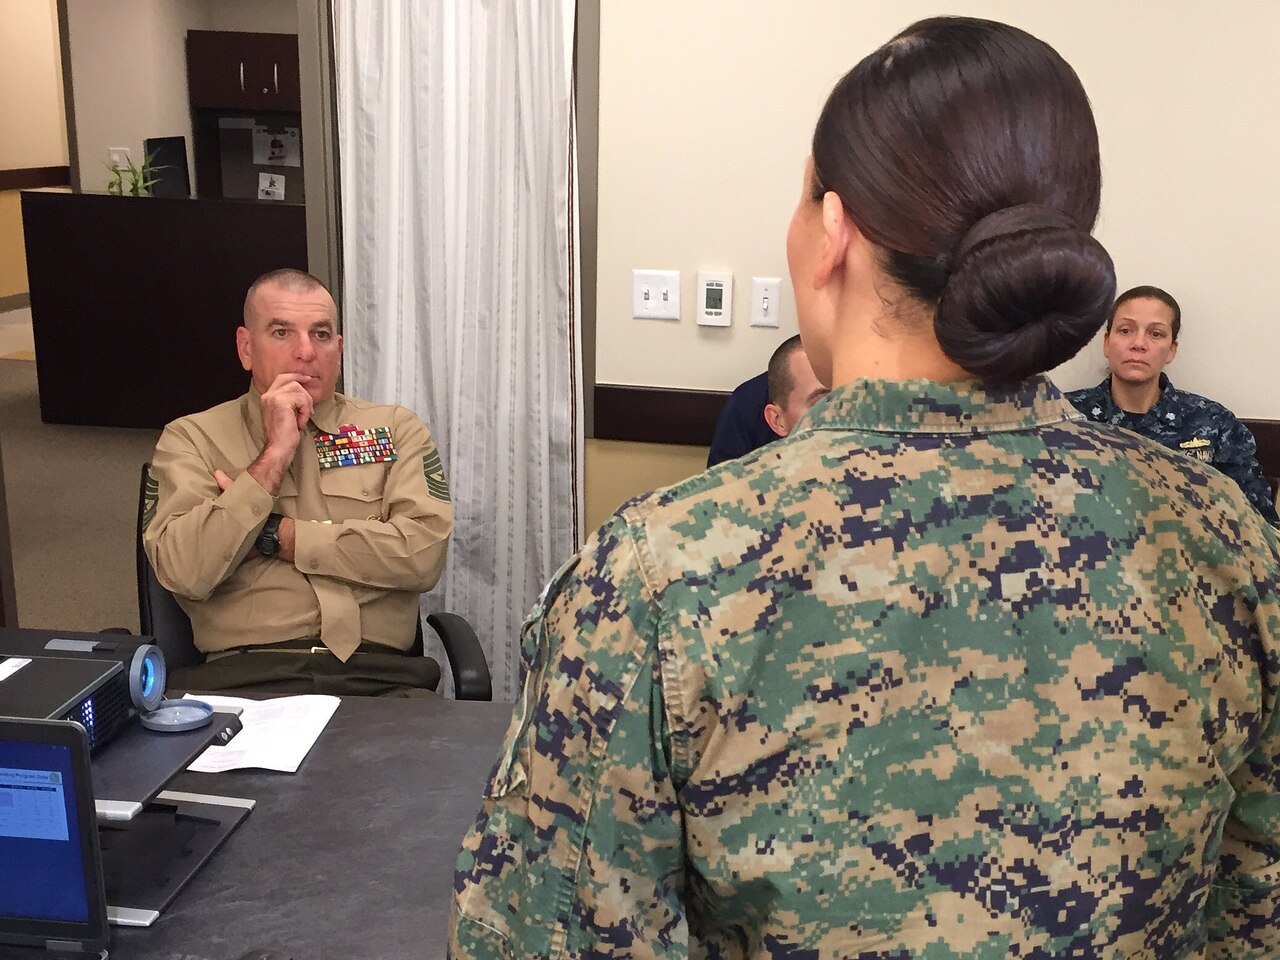 Marine Corps Sgt. Maj. Bryan B. Battaglia, the senior enlisted advisor to the chairman of the Joint Chiefs of Staff, receives a briefing from senior staff at the San Diego Military Entrance Processing Station during his Nov. 12, 2015, visit to the facility as part of his commitment to thanking the personnel who prepare future troops for entry to the military. DoD photo by Claudette Roulo